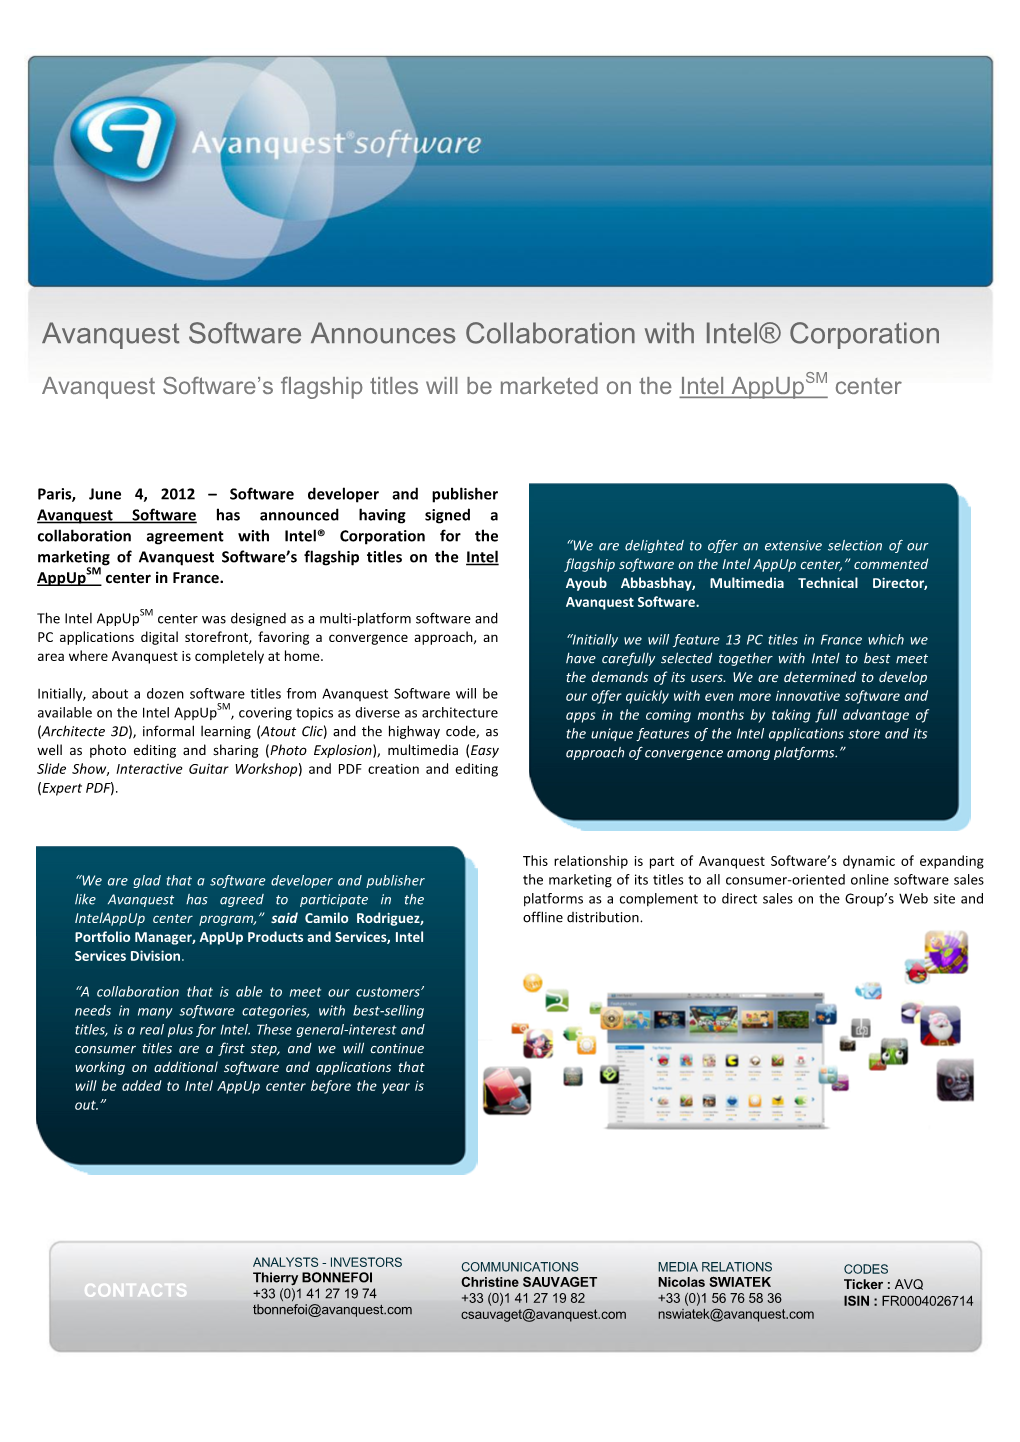 Avanquest Software Announces Collaboration with Intel® Corporation